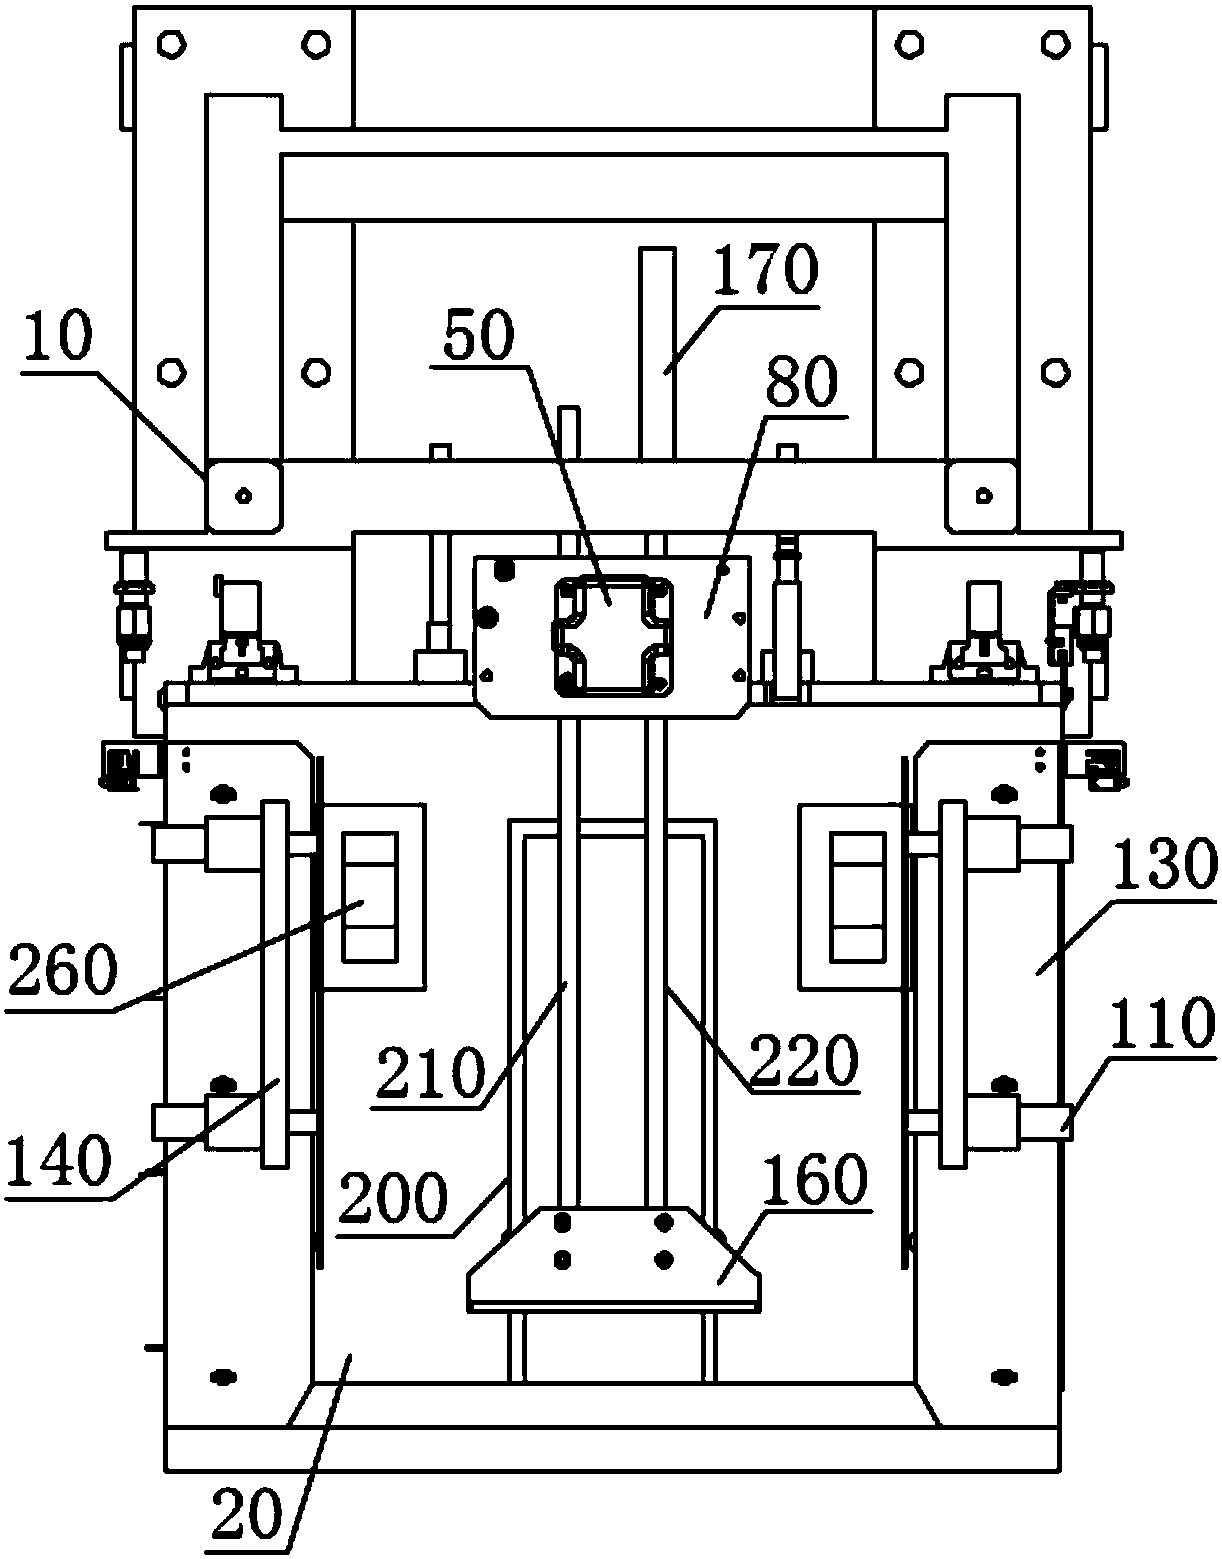 Distribution network tool lifting device